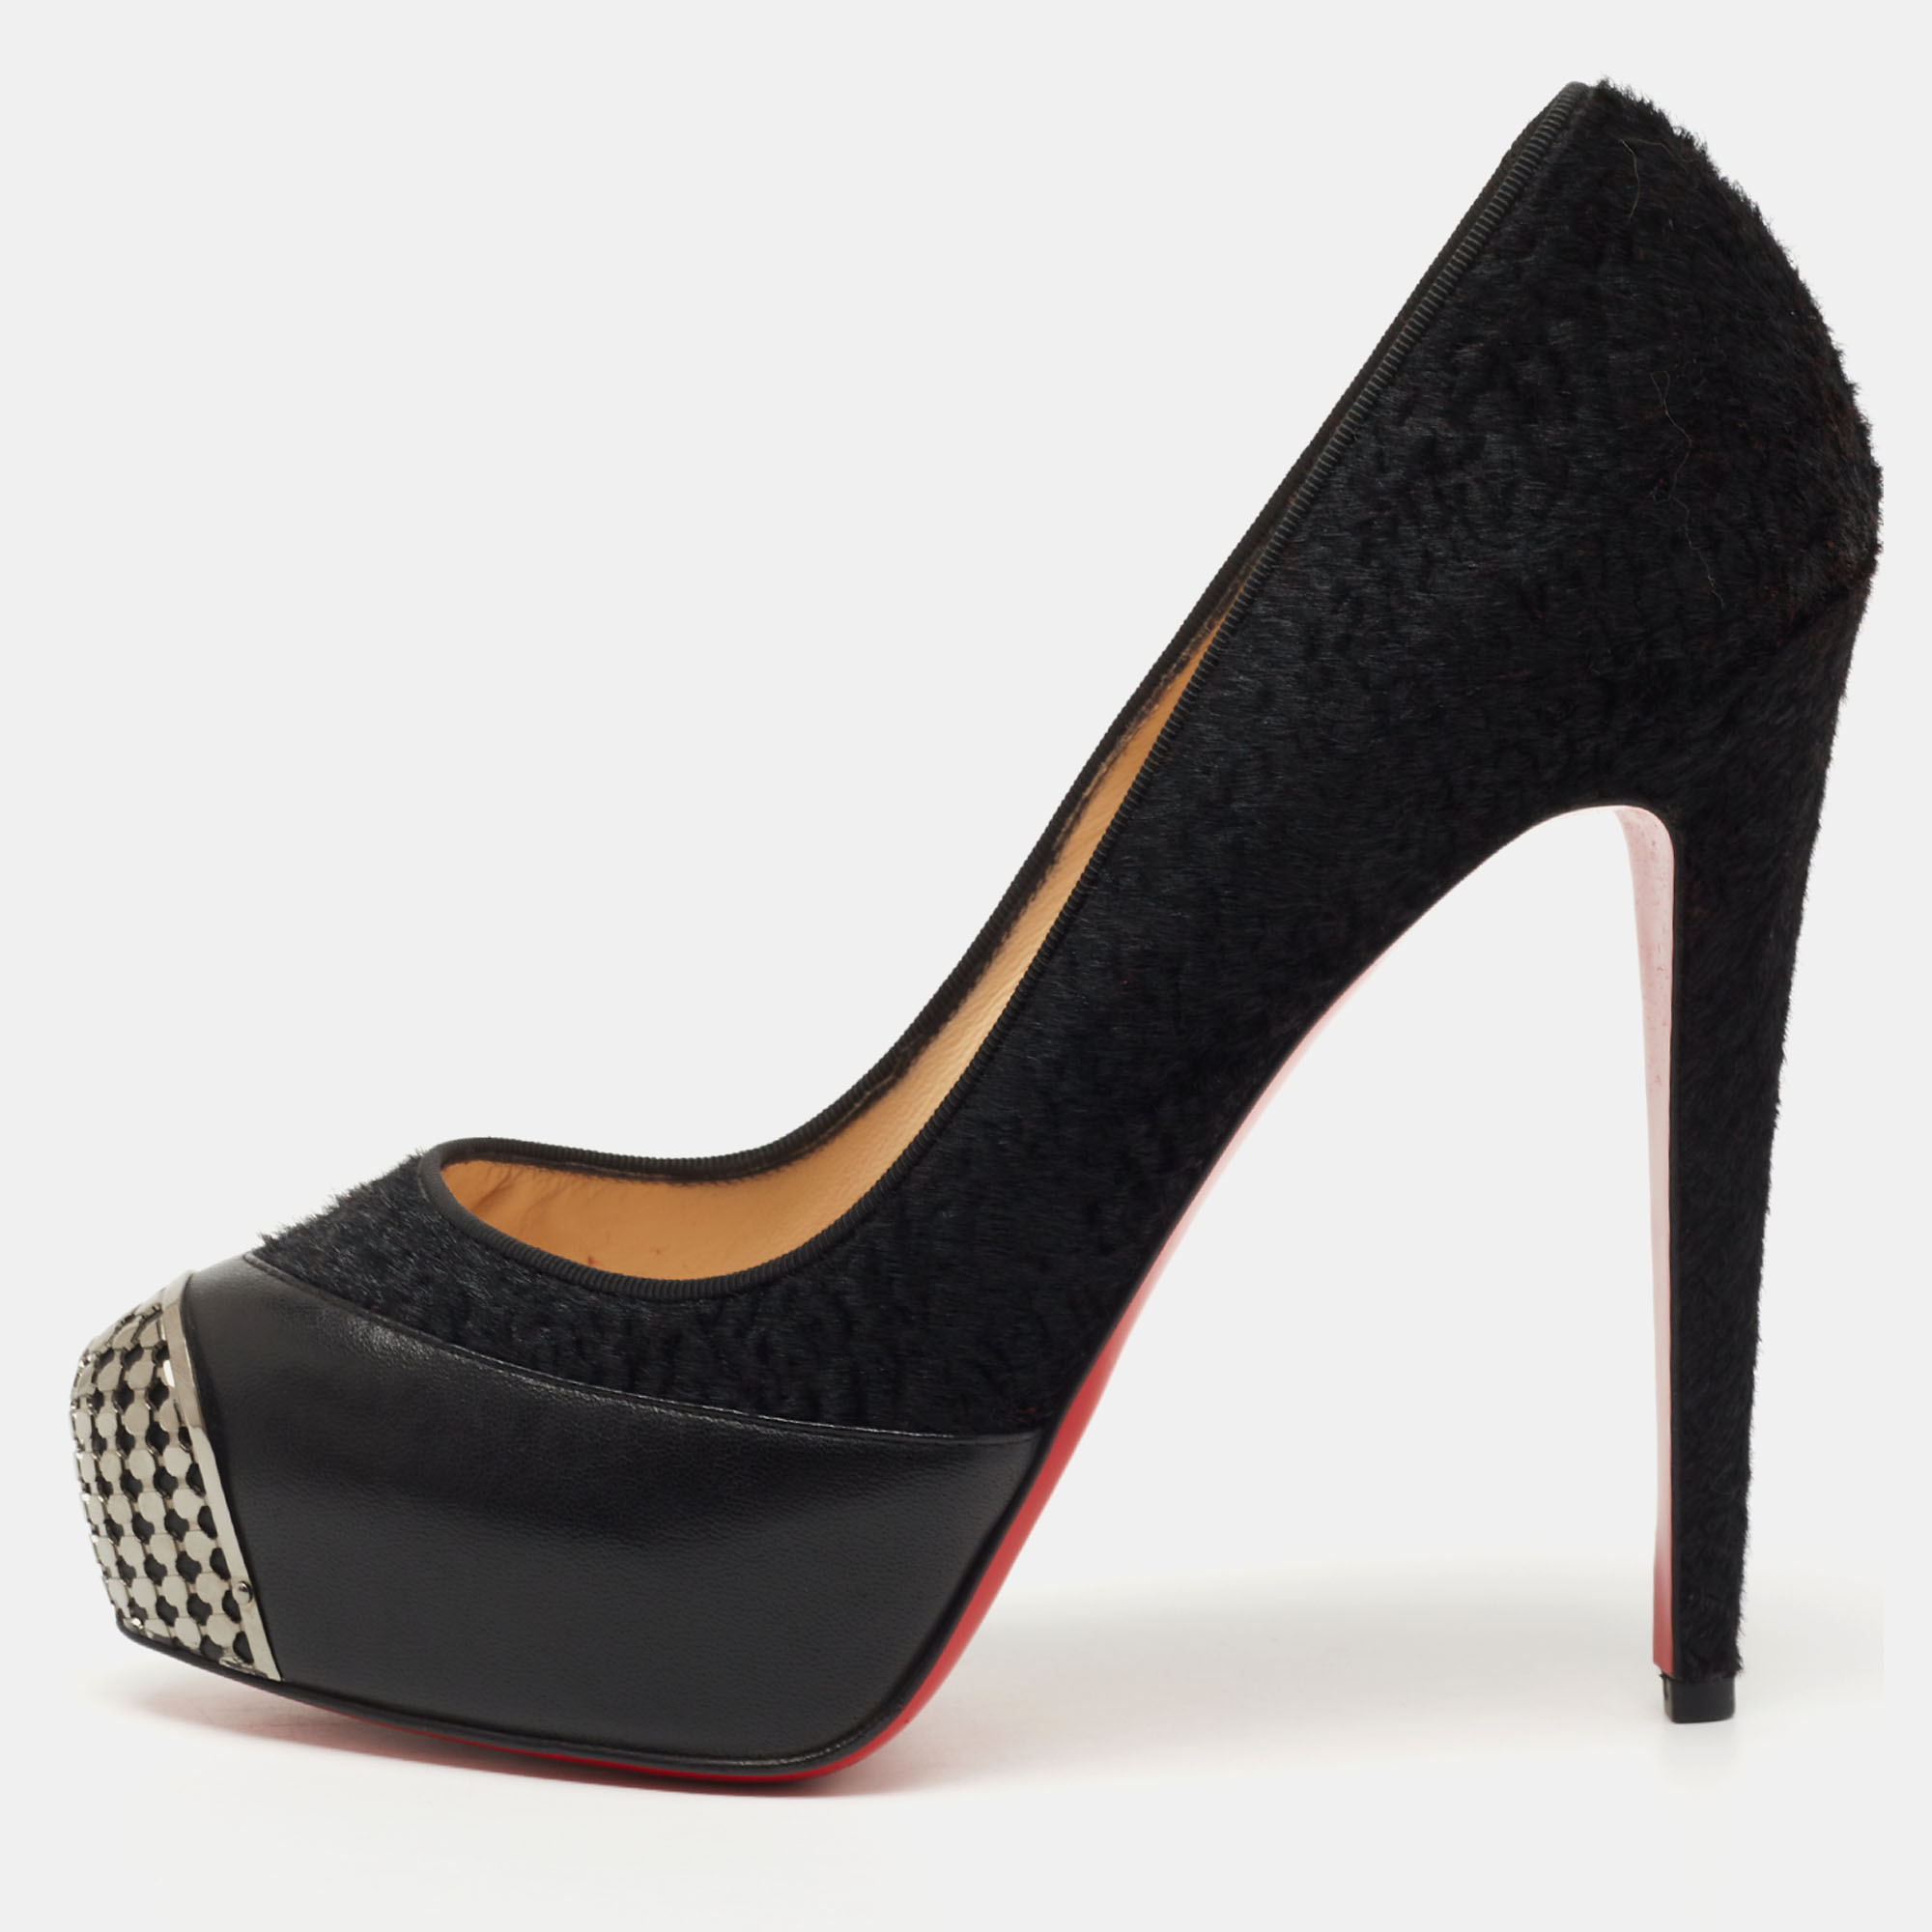 Pre-owned Christian Louboutin Black Calfhair And Leather Maggie Pumps Size 40